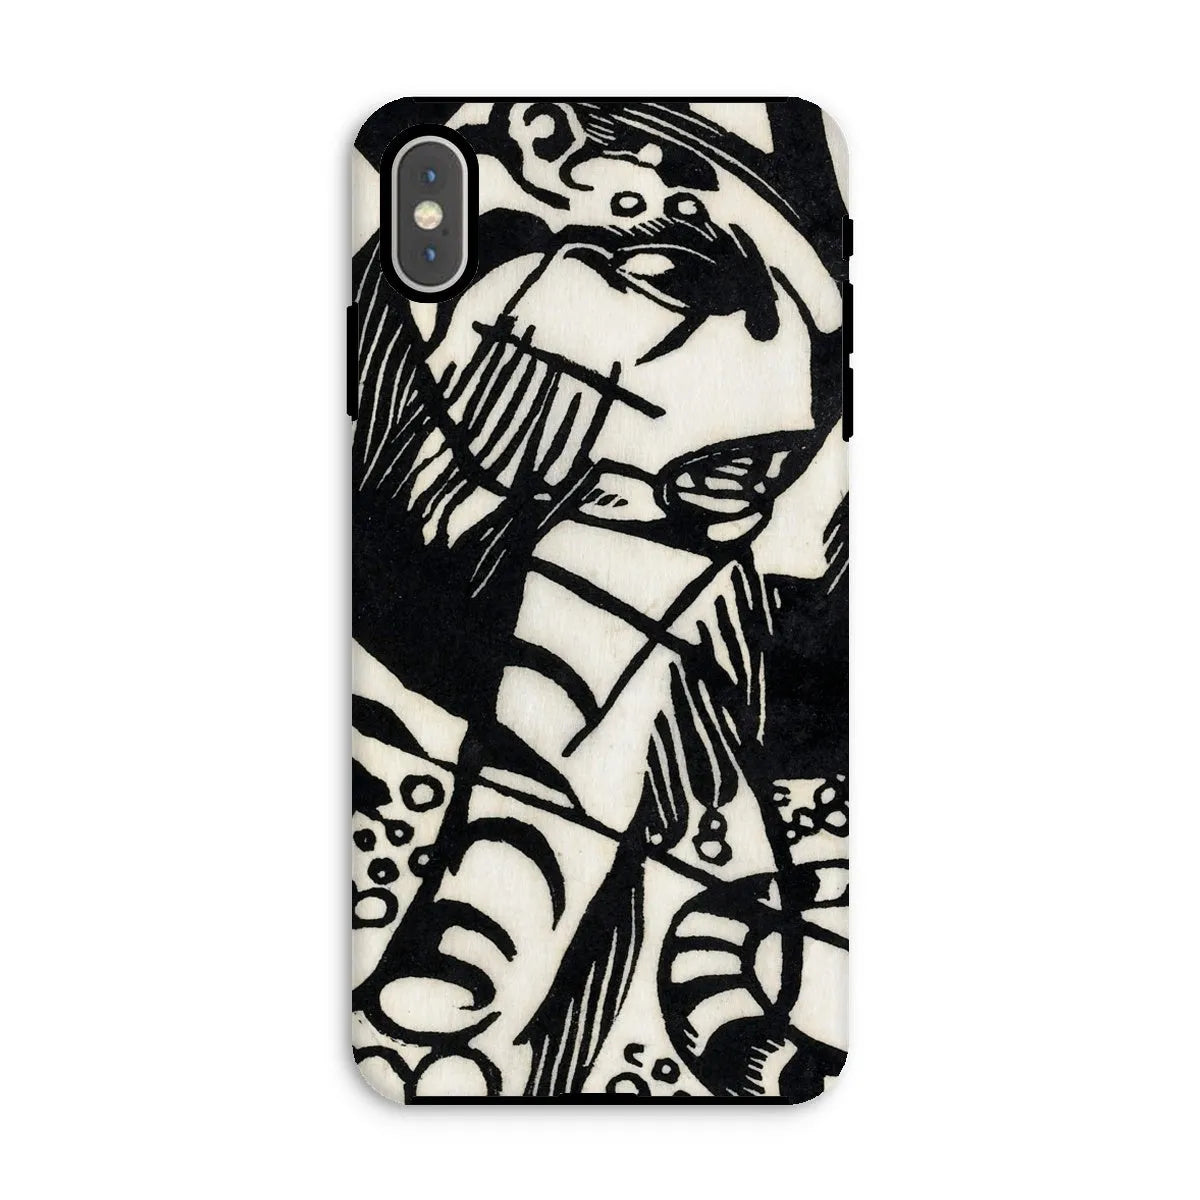 Tiger - Animal Aesthetic Phone Case - Franz Marc - Iphone Xs Max / Matte - Mobile Phone Cases - Aesthetic Art